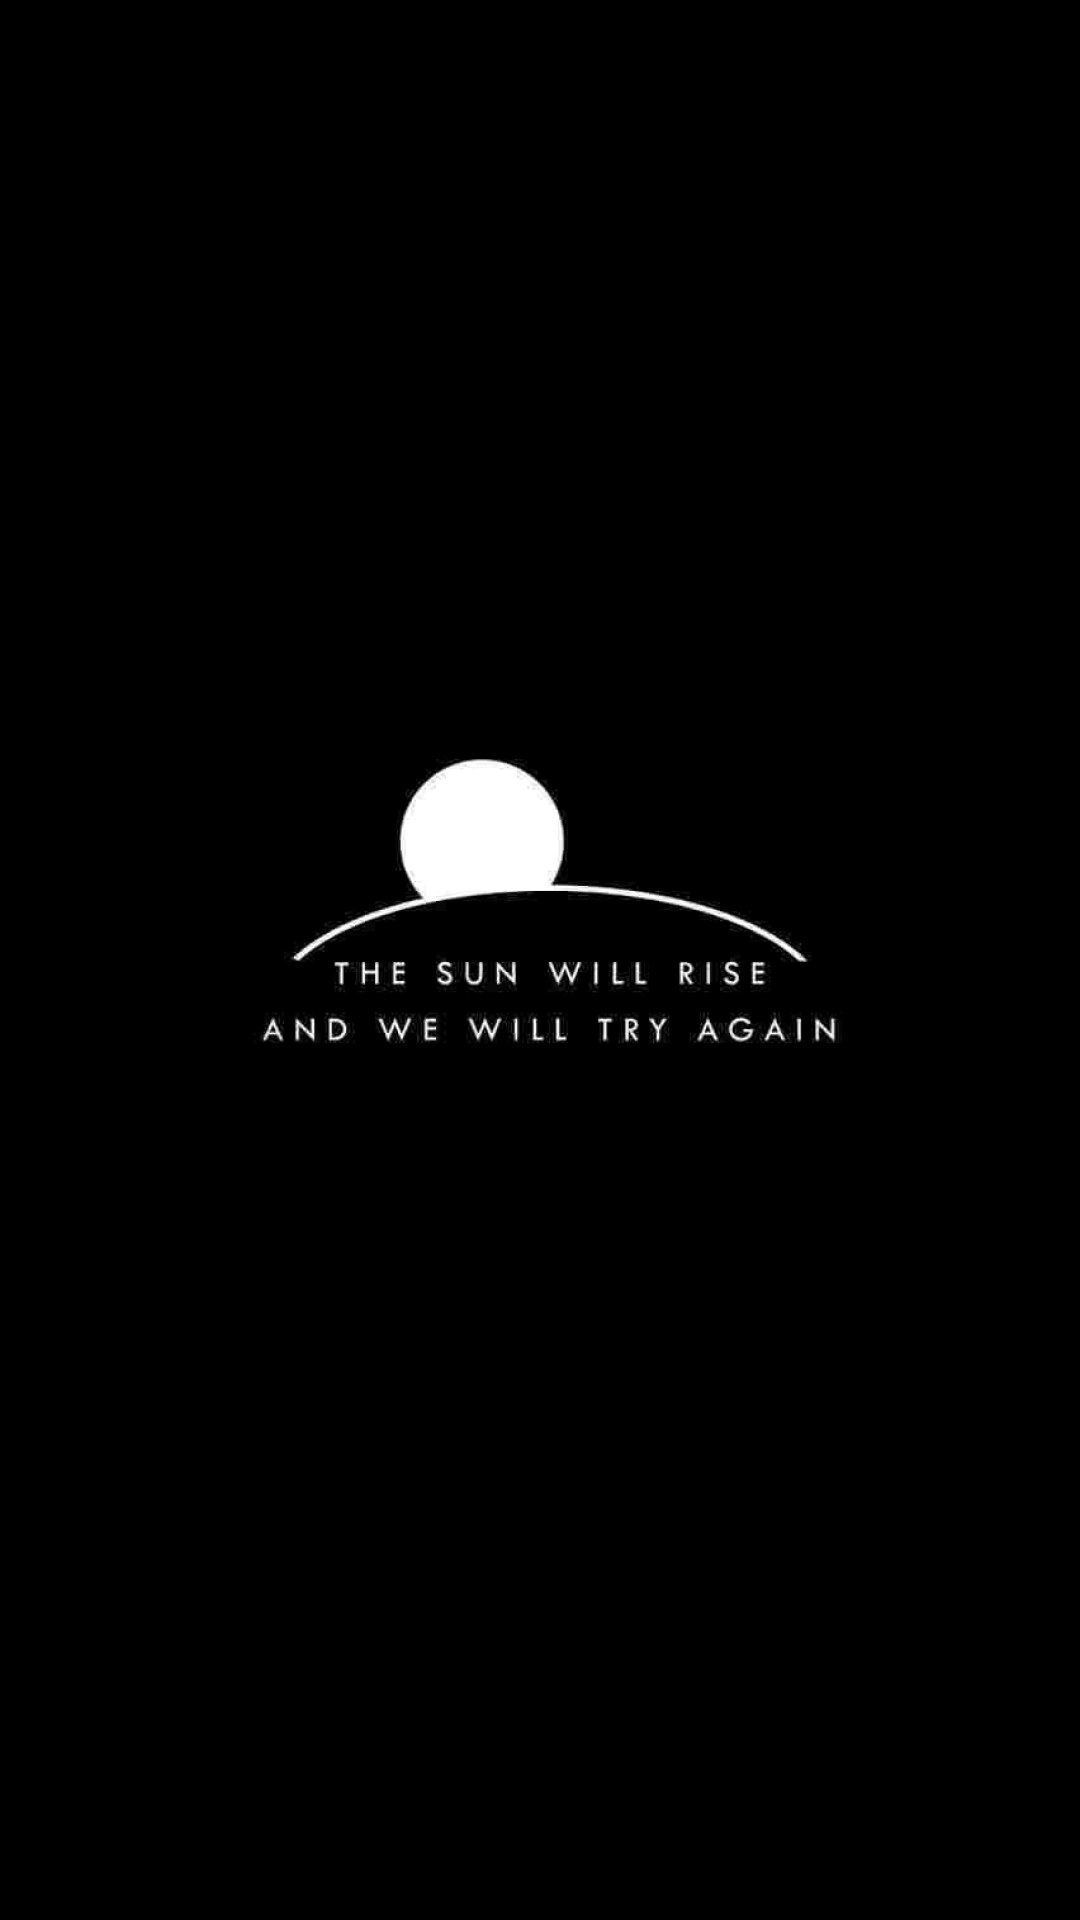 Aesthetic Black Wallpaper, The Sun Will Rise And We Will Try Again • Wallpaper For You HD Wallpaper For Desktop & Mobile